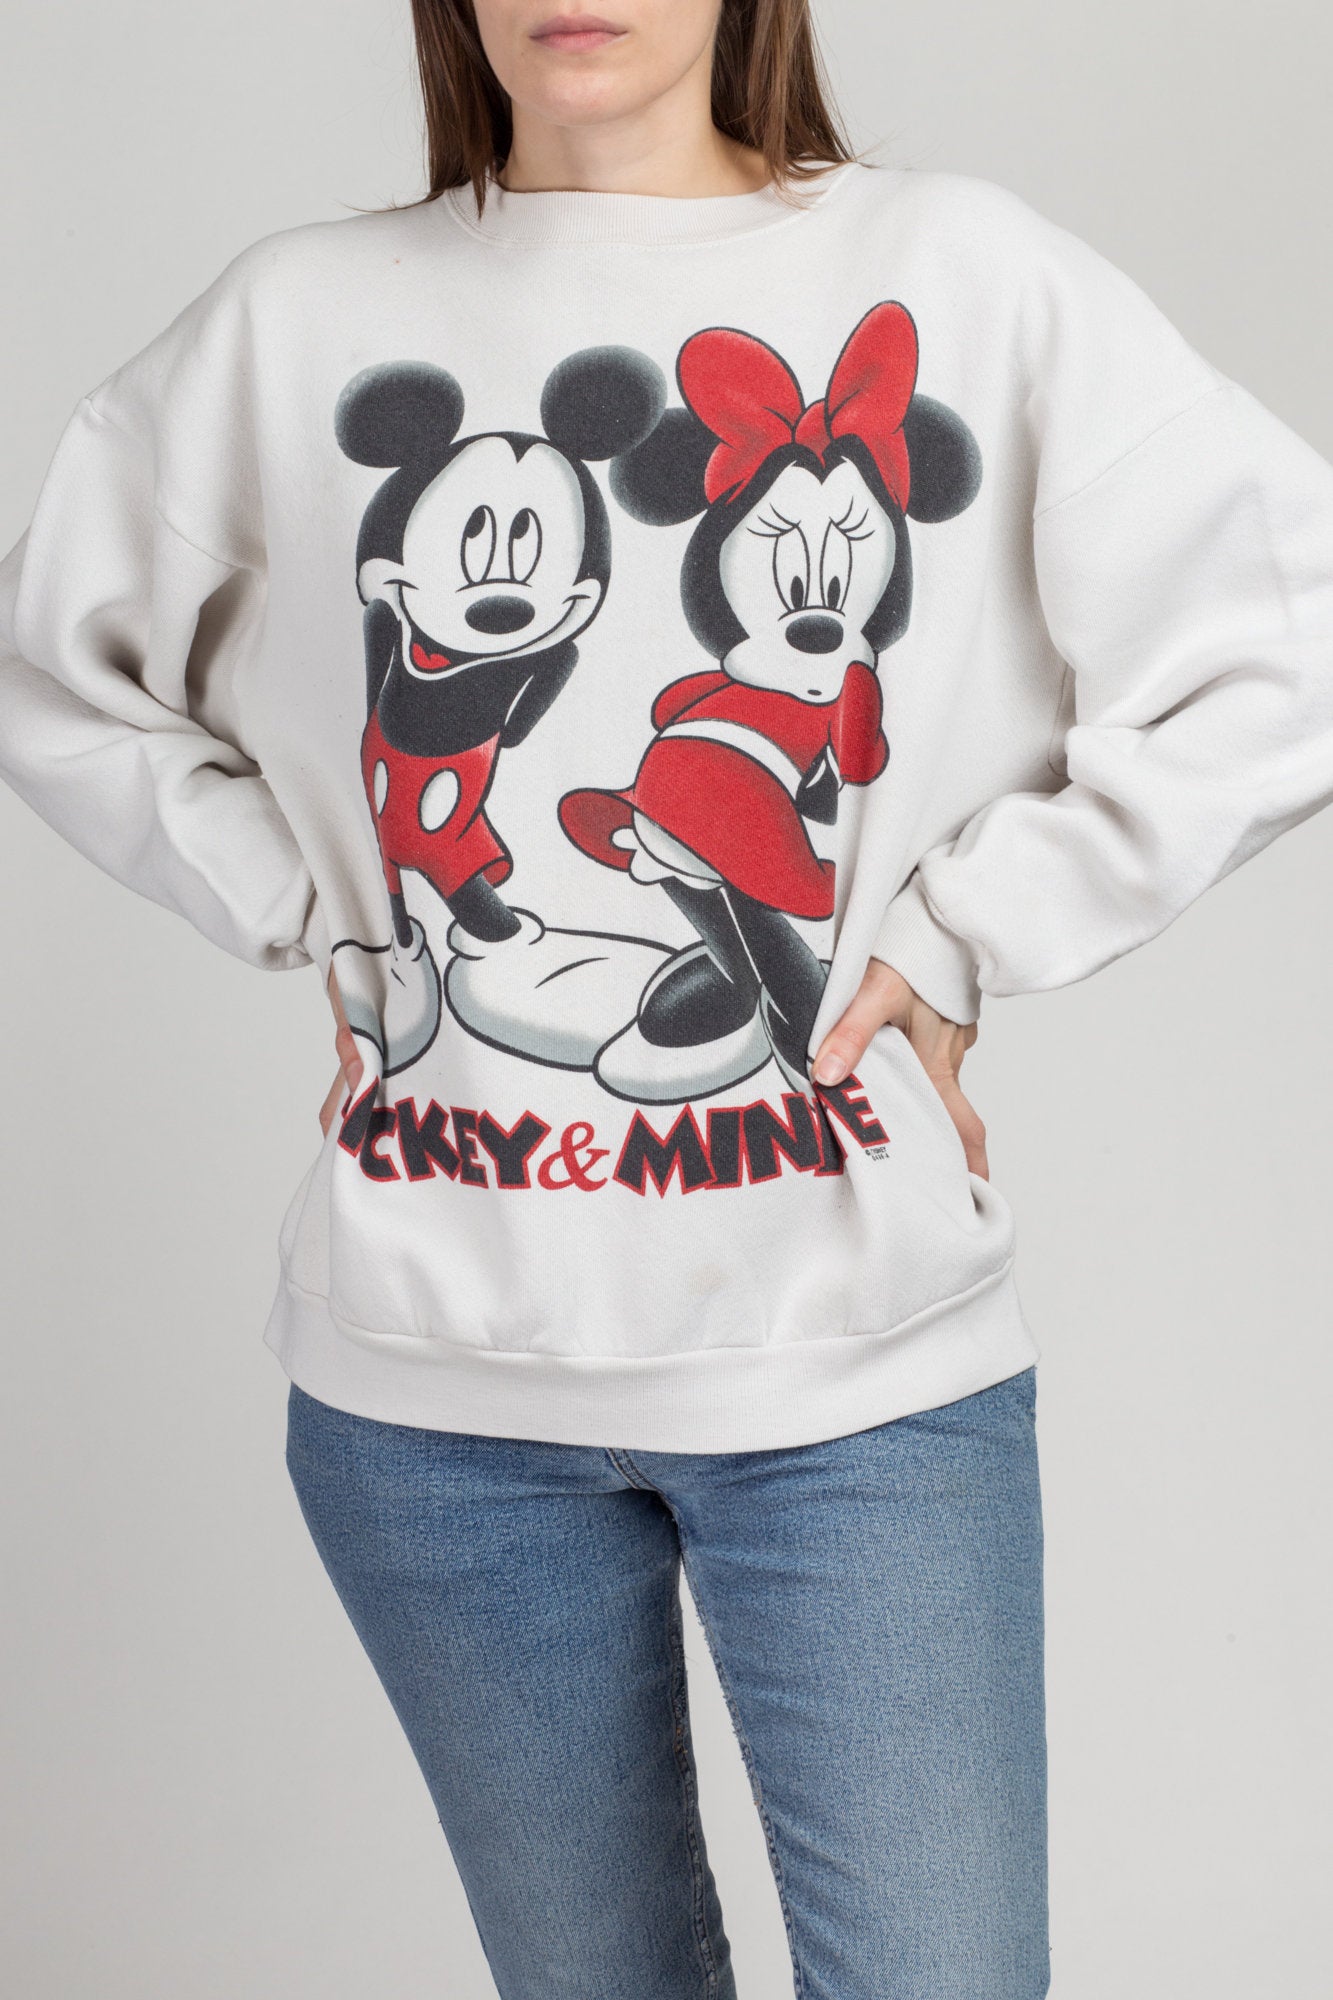 90s Mickey & Minnie Mouse Sweatshirt - Extra Large | Vintage Jerry Leigh Graphic Disney Cartoon Pullover